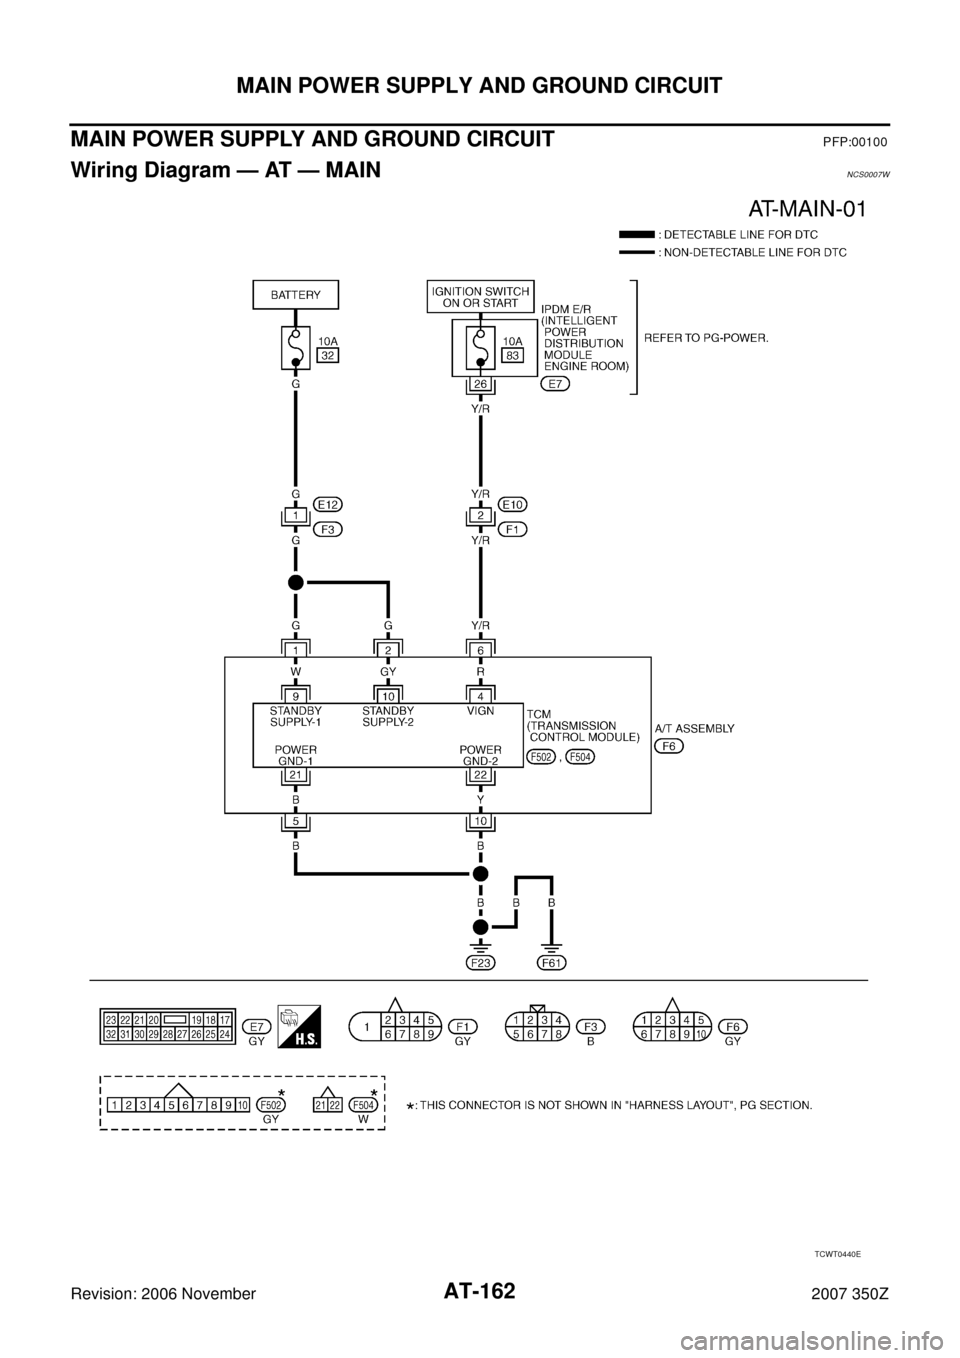 NISSAN 350Z 2007 Z33 Automatic Transmission Workshop Manual AT-162
MAIN POWER SUPPLY AND GROUND CIRCUIT
Revision: 2006 November2007 350Z
MAIN POWER SUPPLY AND GROUND CIRCUITPFP:00100
Wiring Diagram — AT — MAINNCS0007W
TCWT0440E 